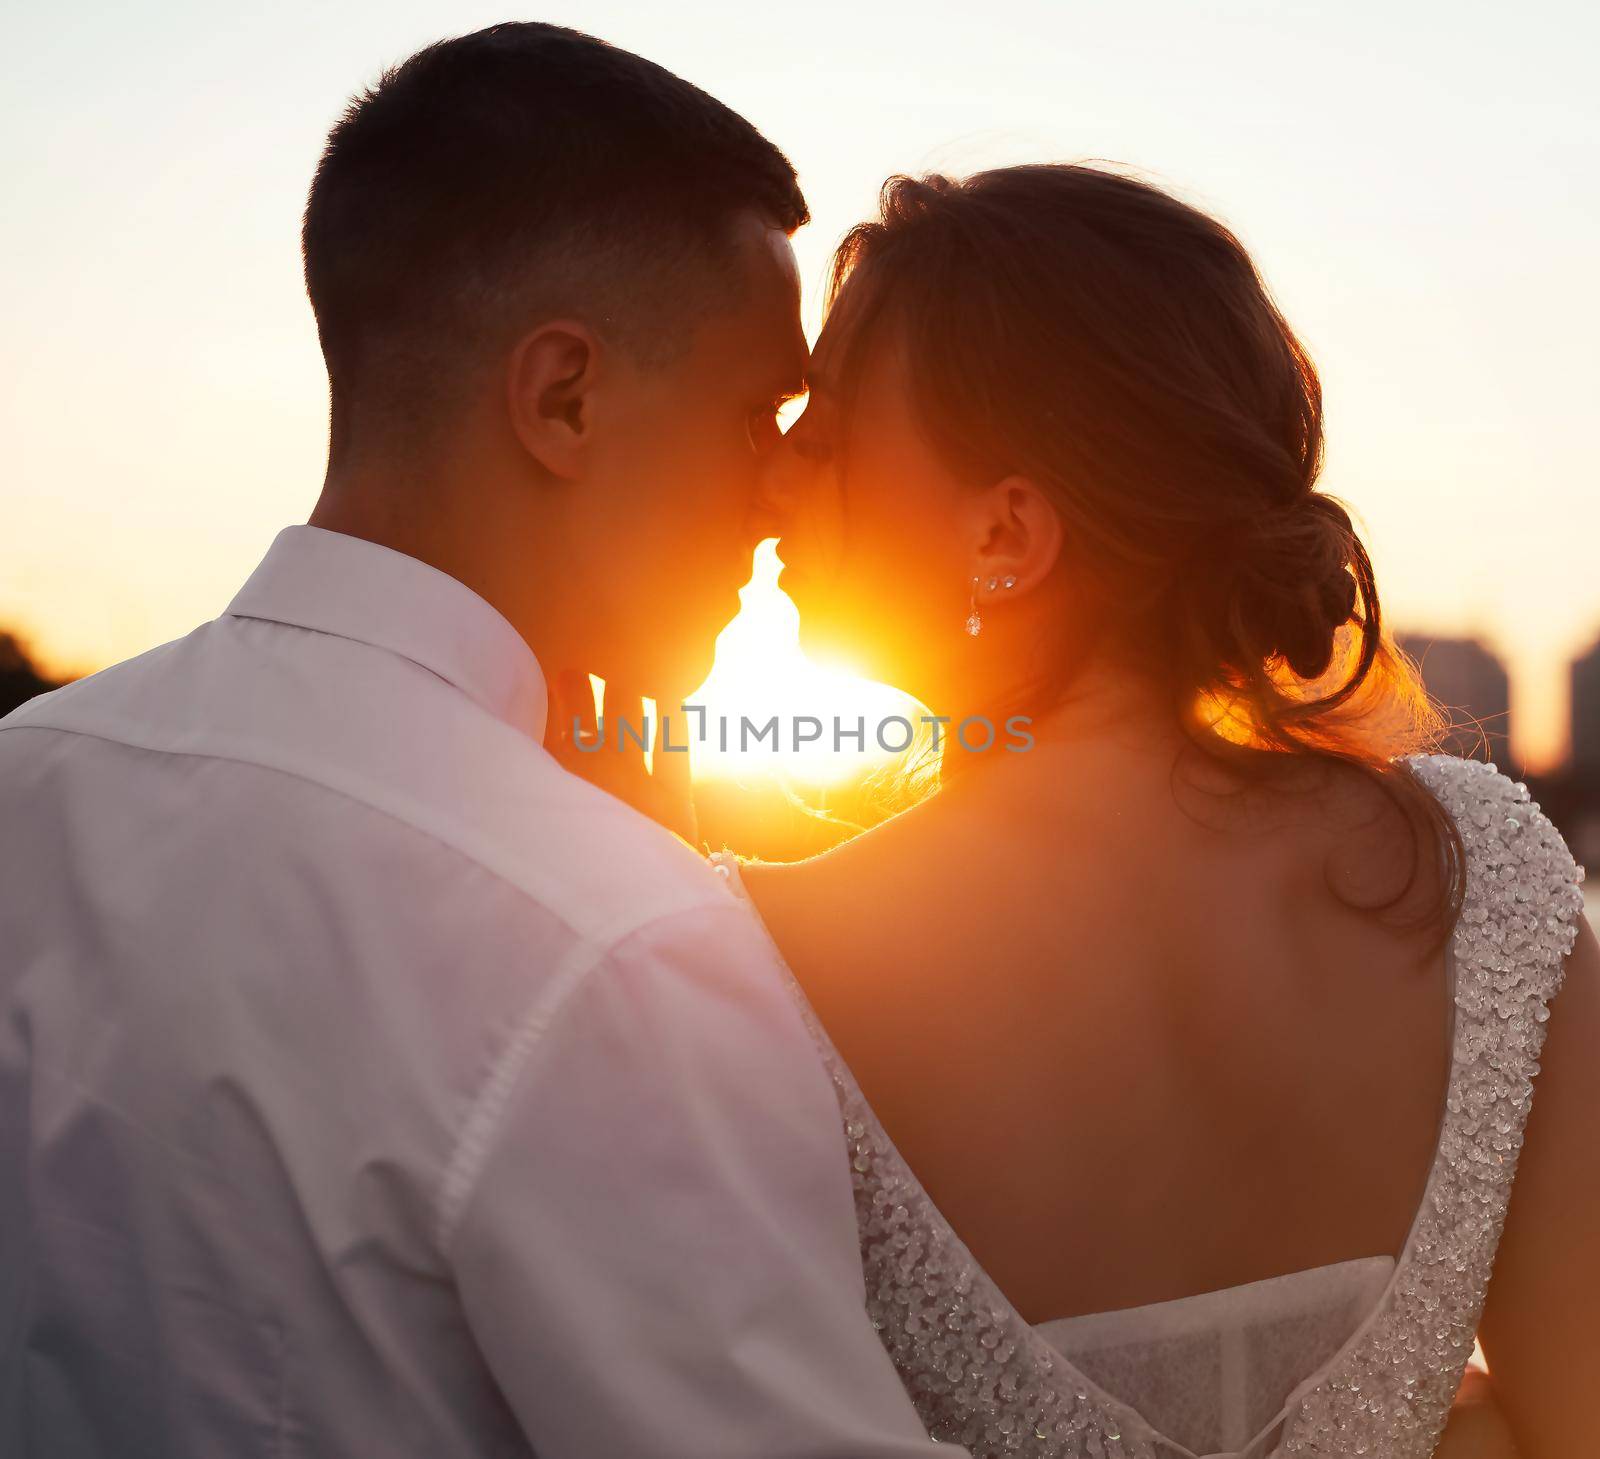 A kiss of the bride and groom at sunset. Wedding article. A happy couple. Love. Photos for printed products. by alenka2194